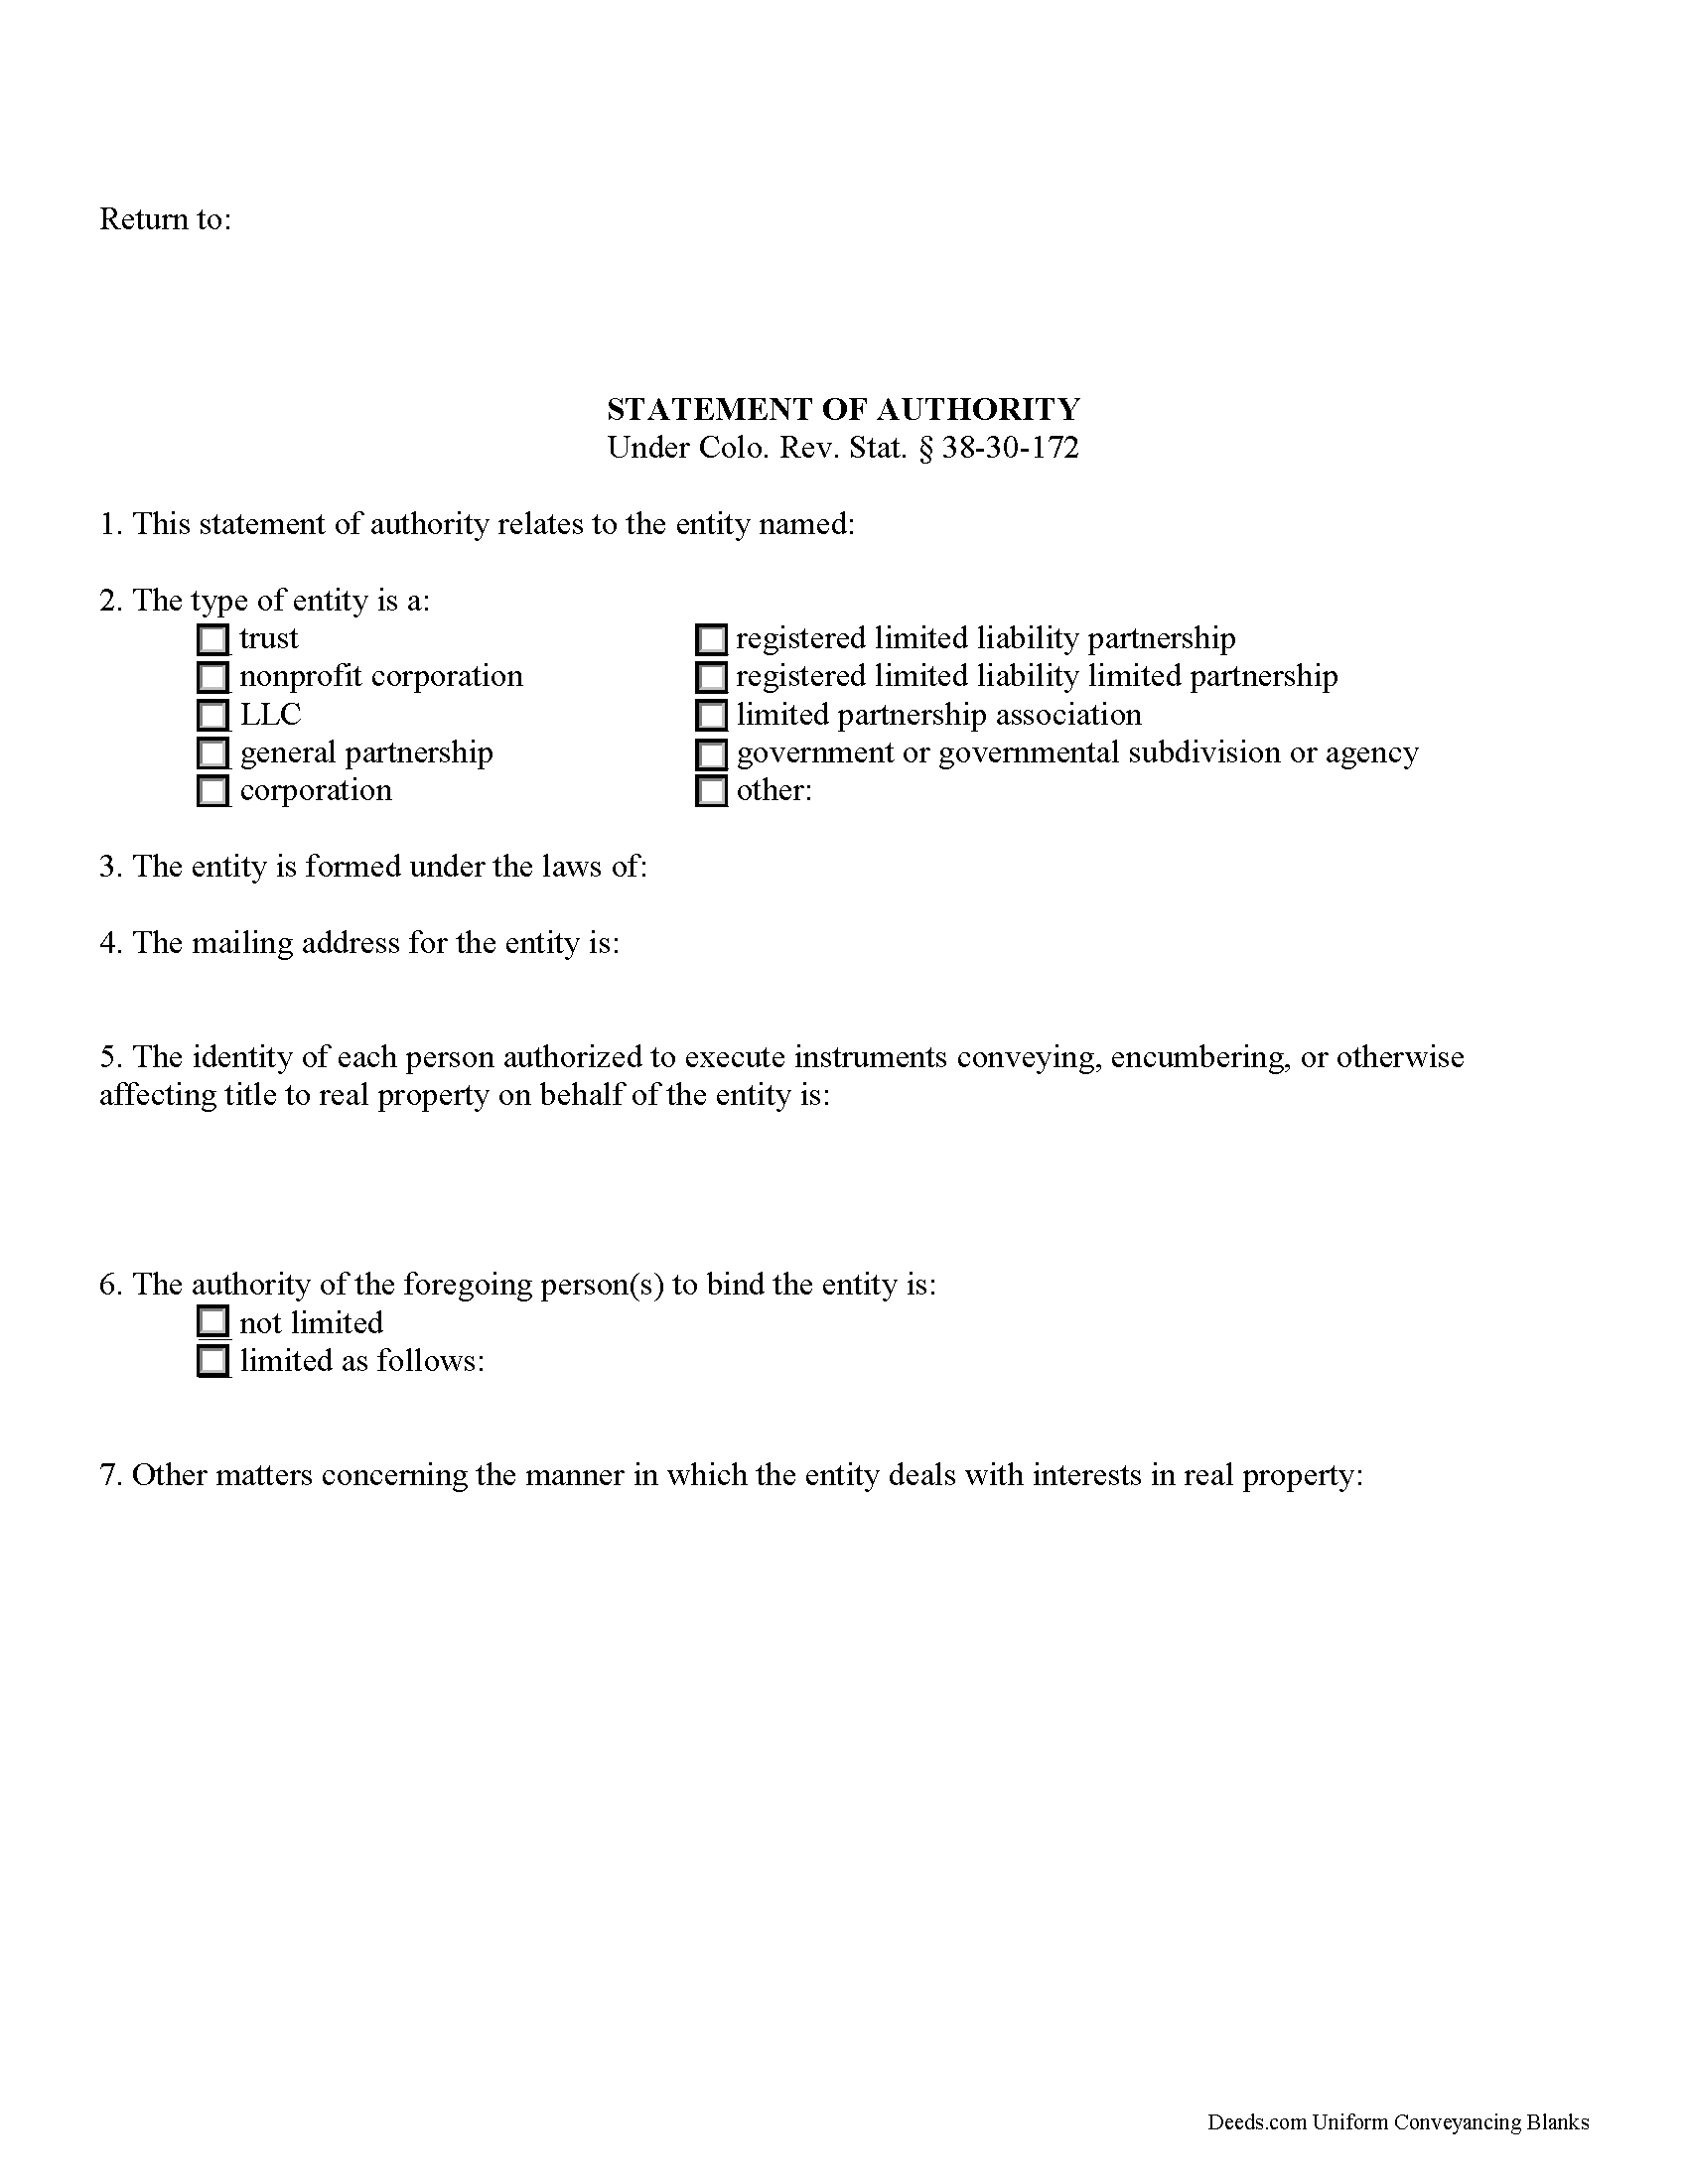 Statement of Authority Form